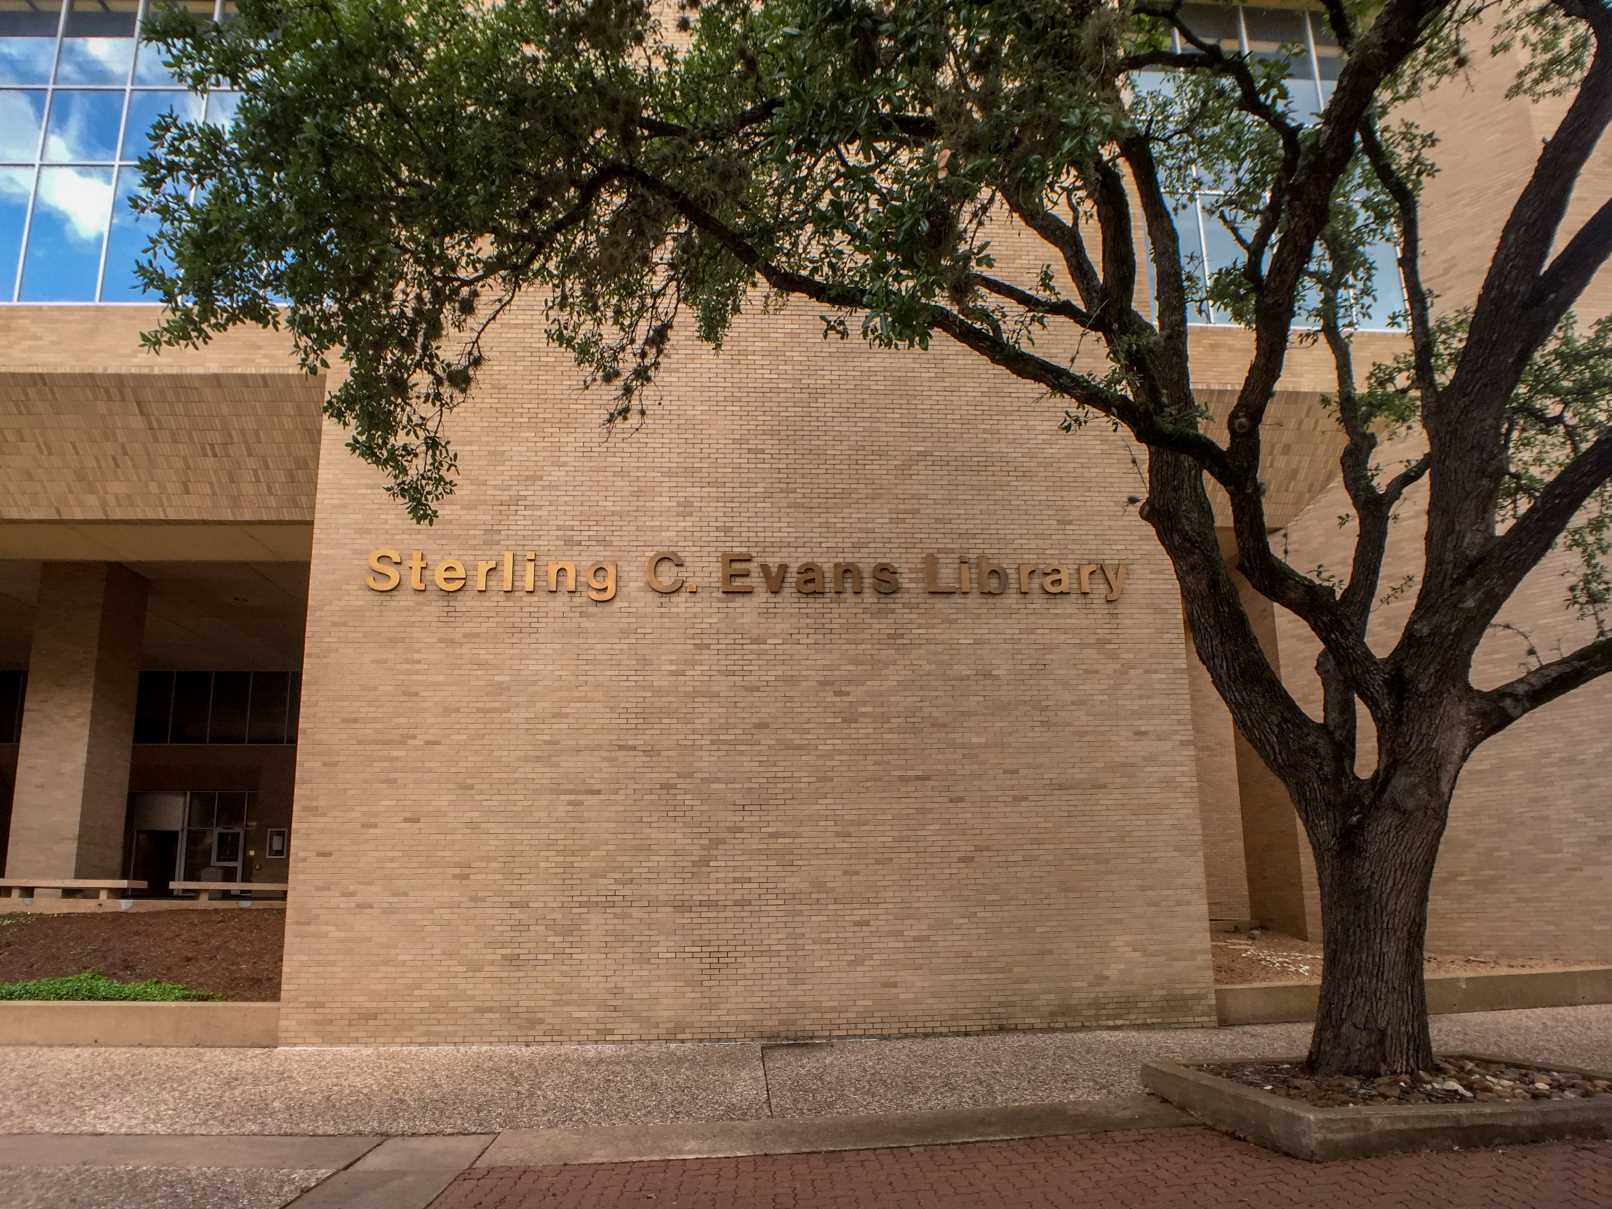 17-surprising-facts-about-sterling-c-evans-library